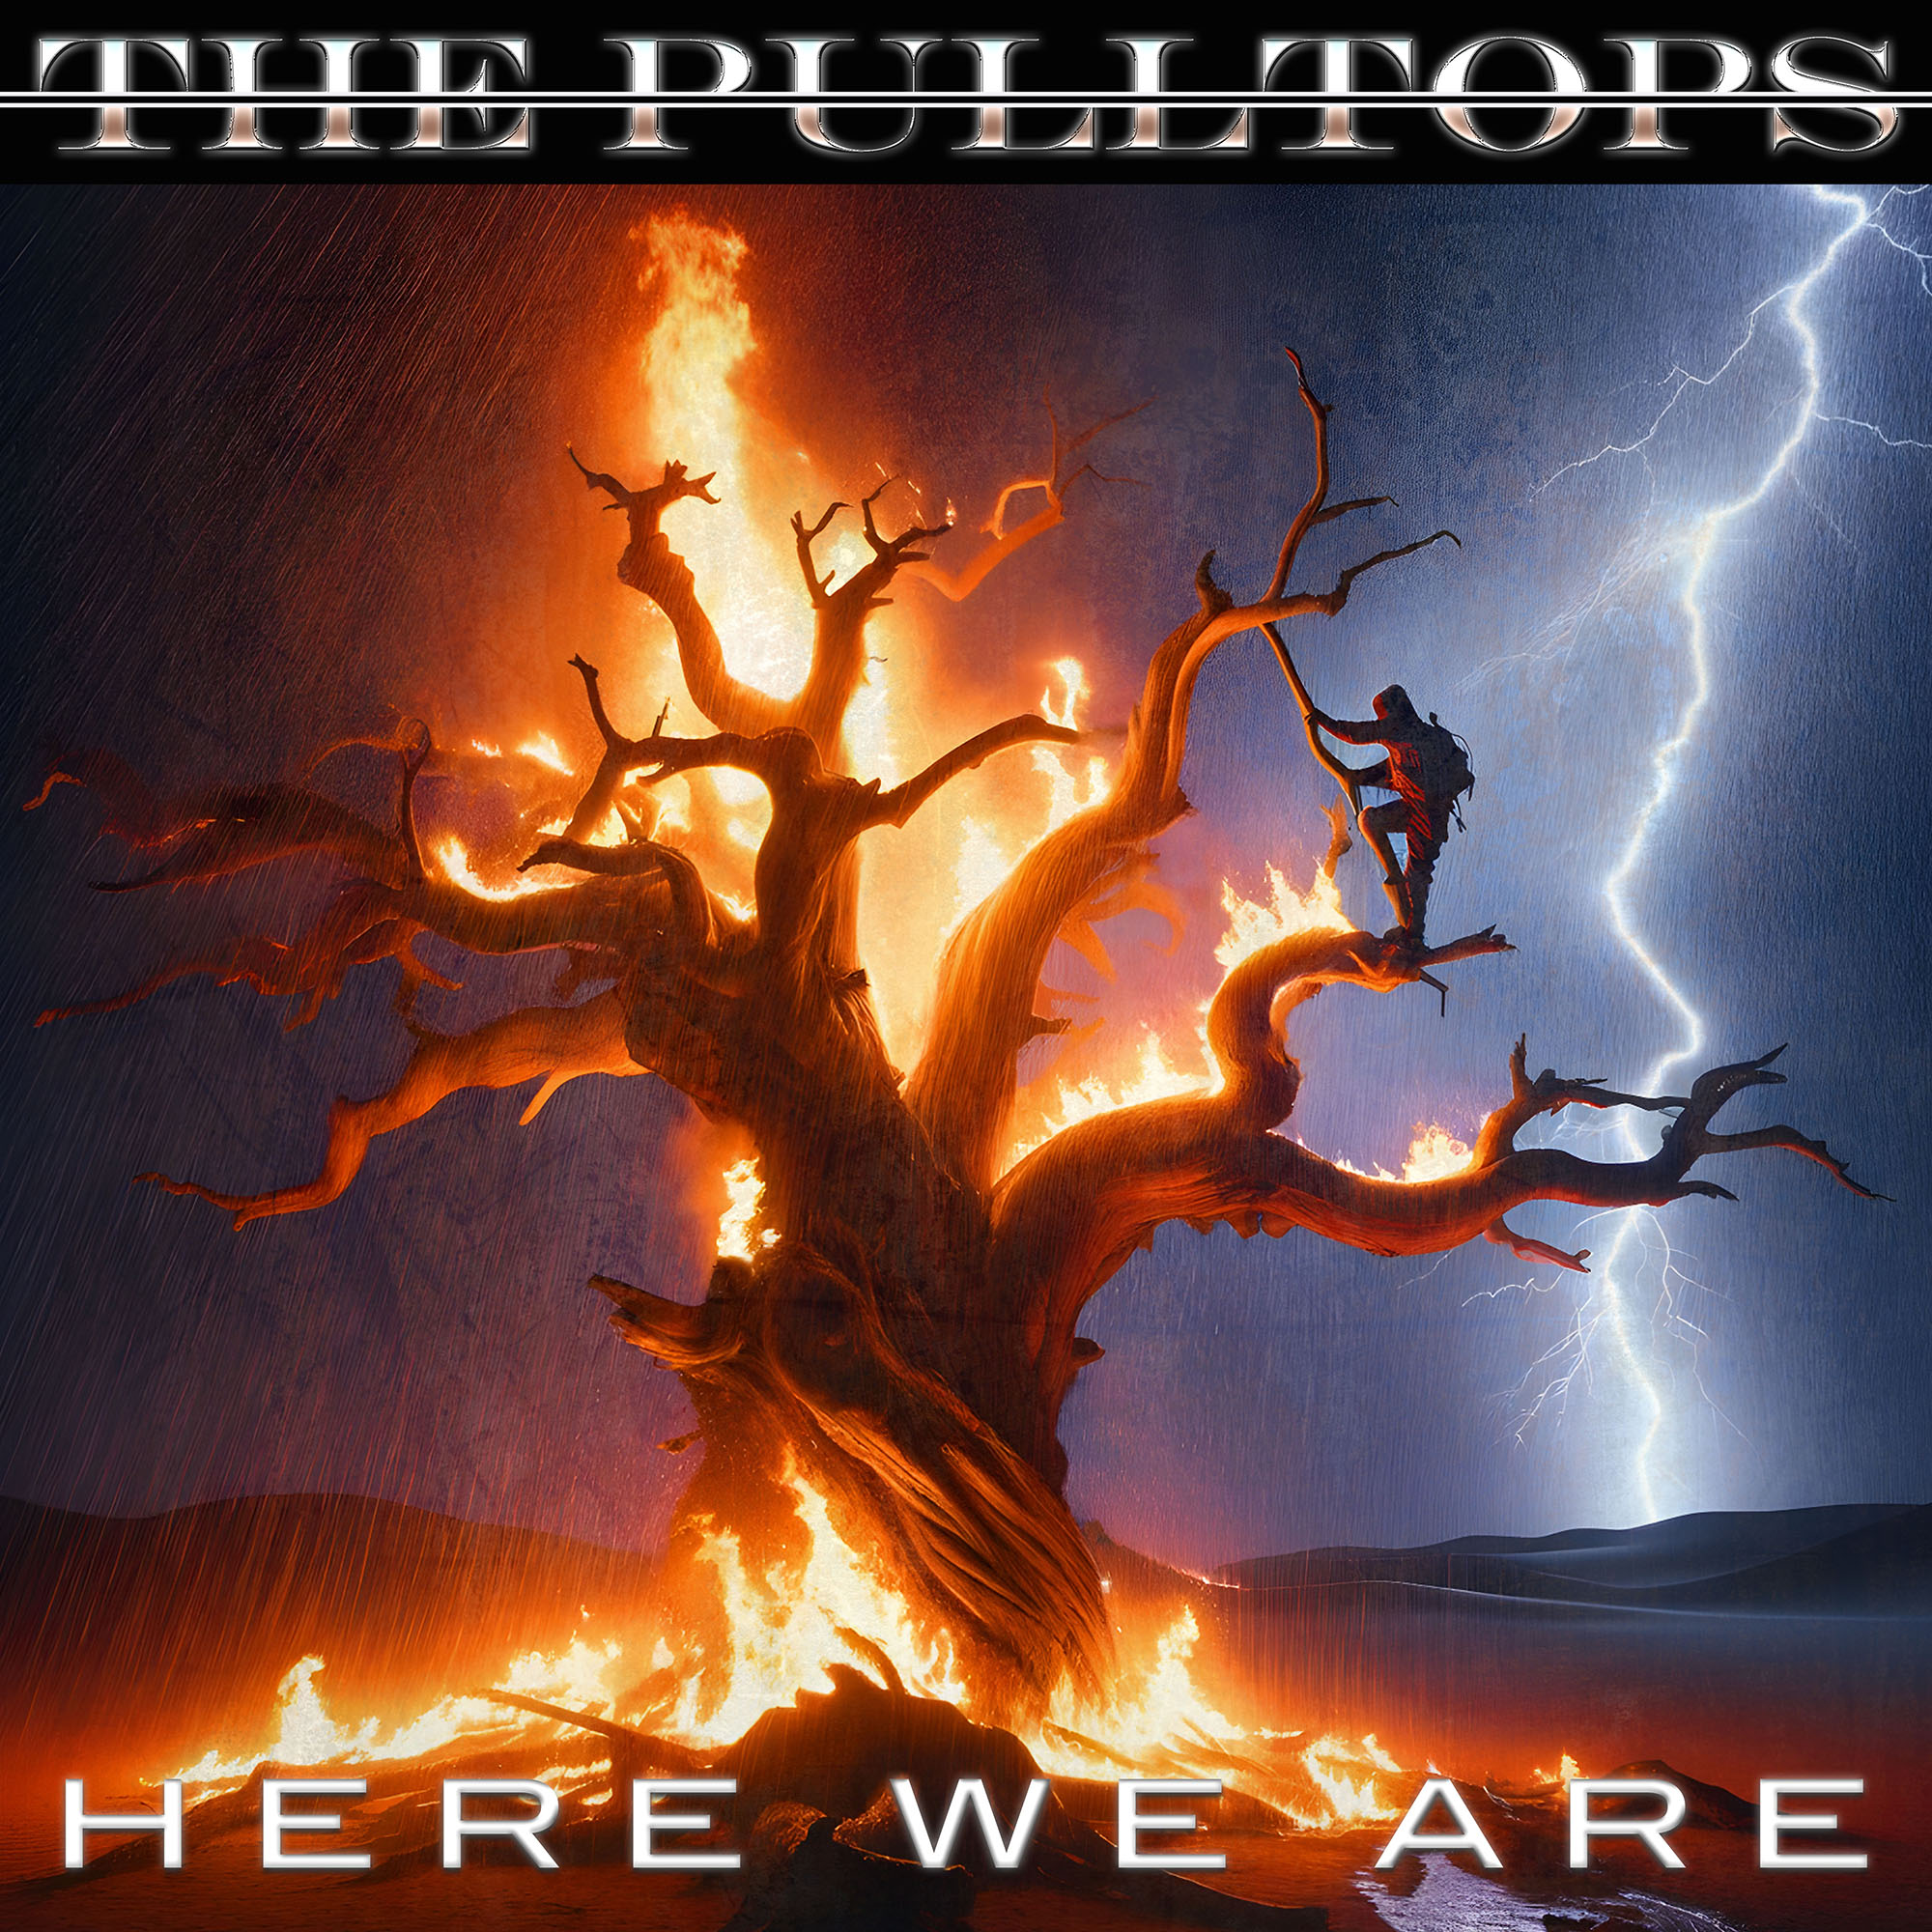 The Pulltops – “Here We Are”